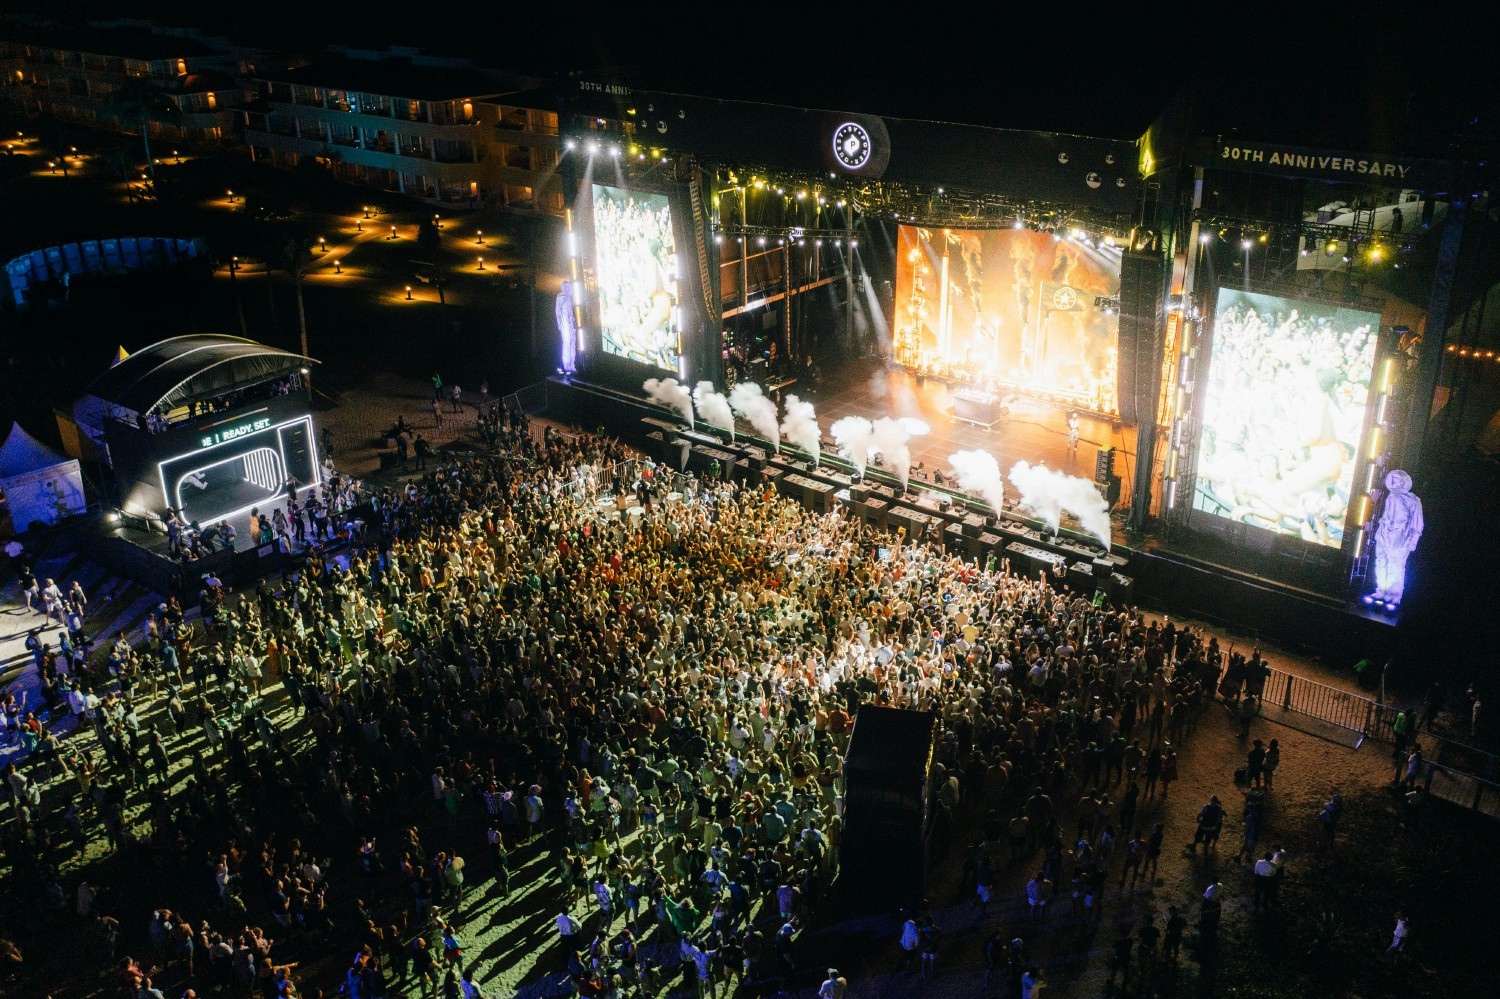 Enjoy acts like Bruno Mars, Wiz Khalifa, Bryce Vine, and more at Power’s annual Quest music festival in Mexico.